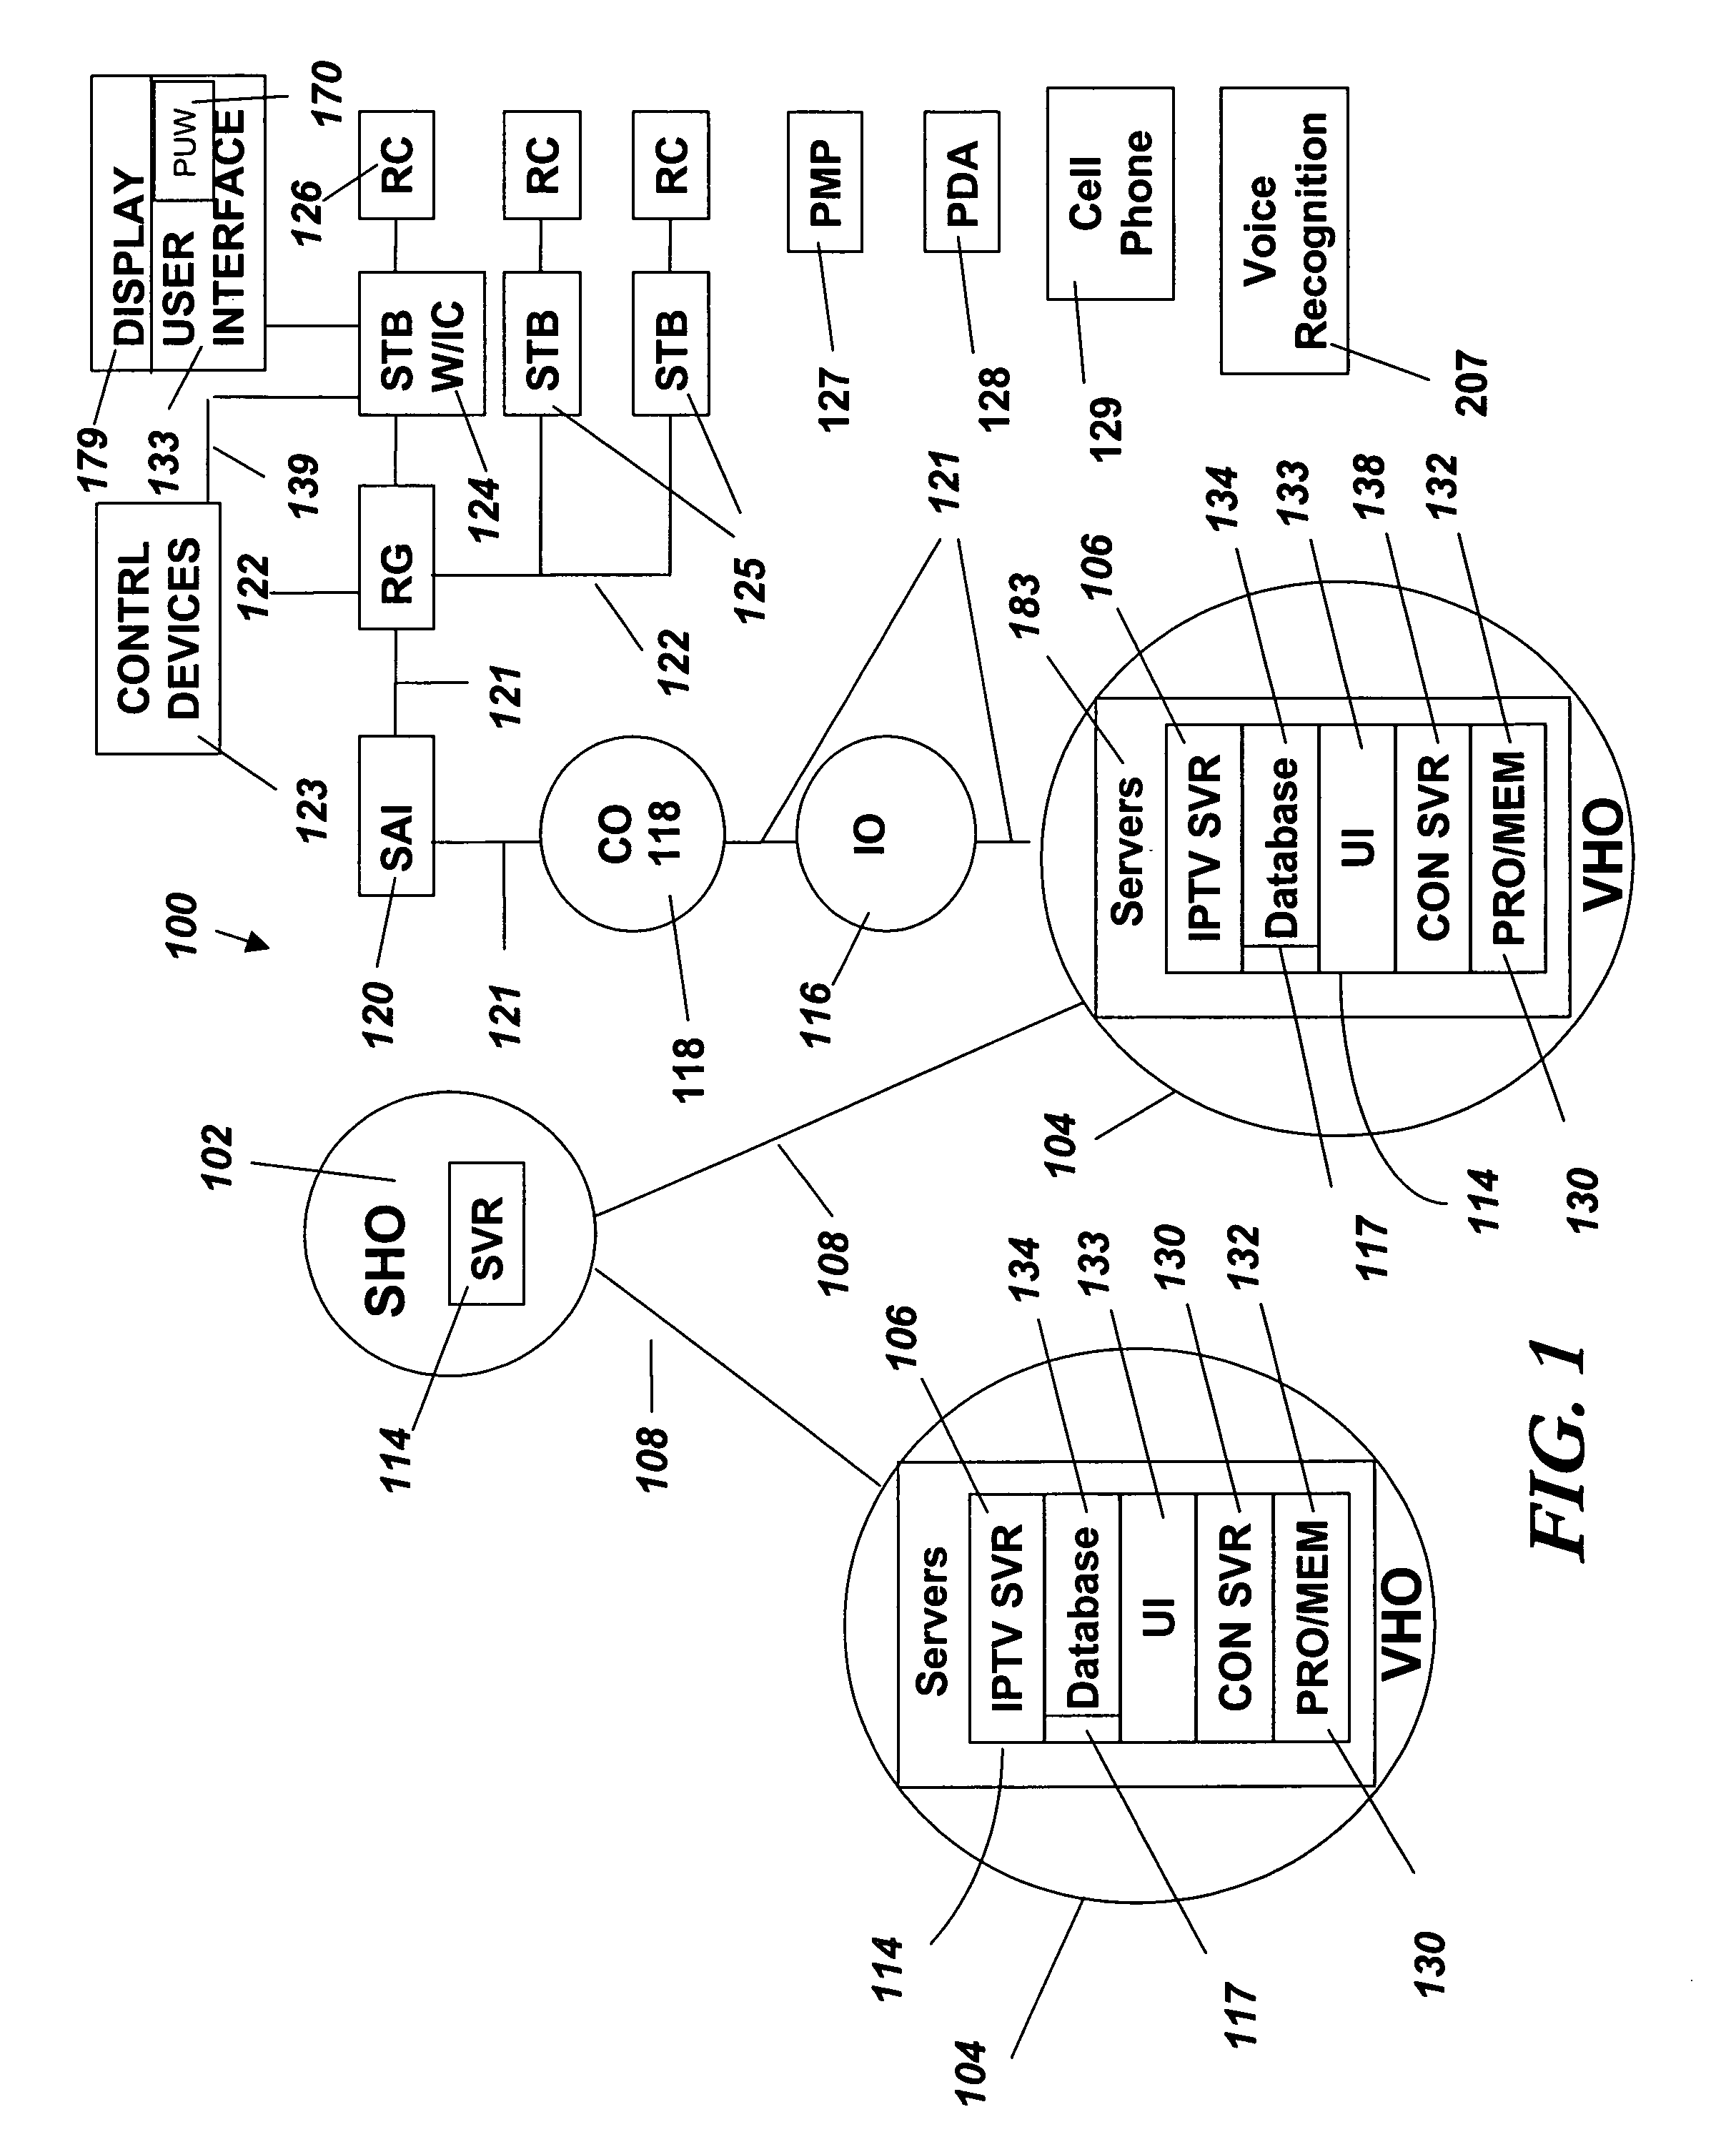 Home automation system and method